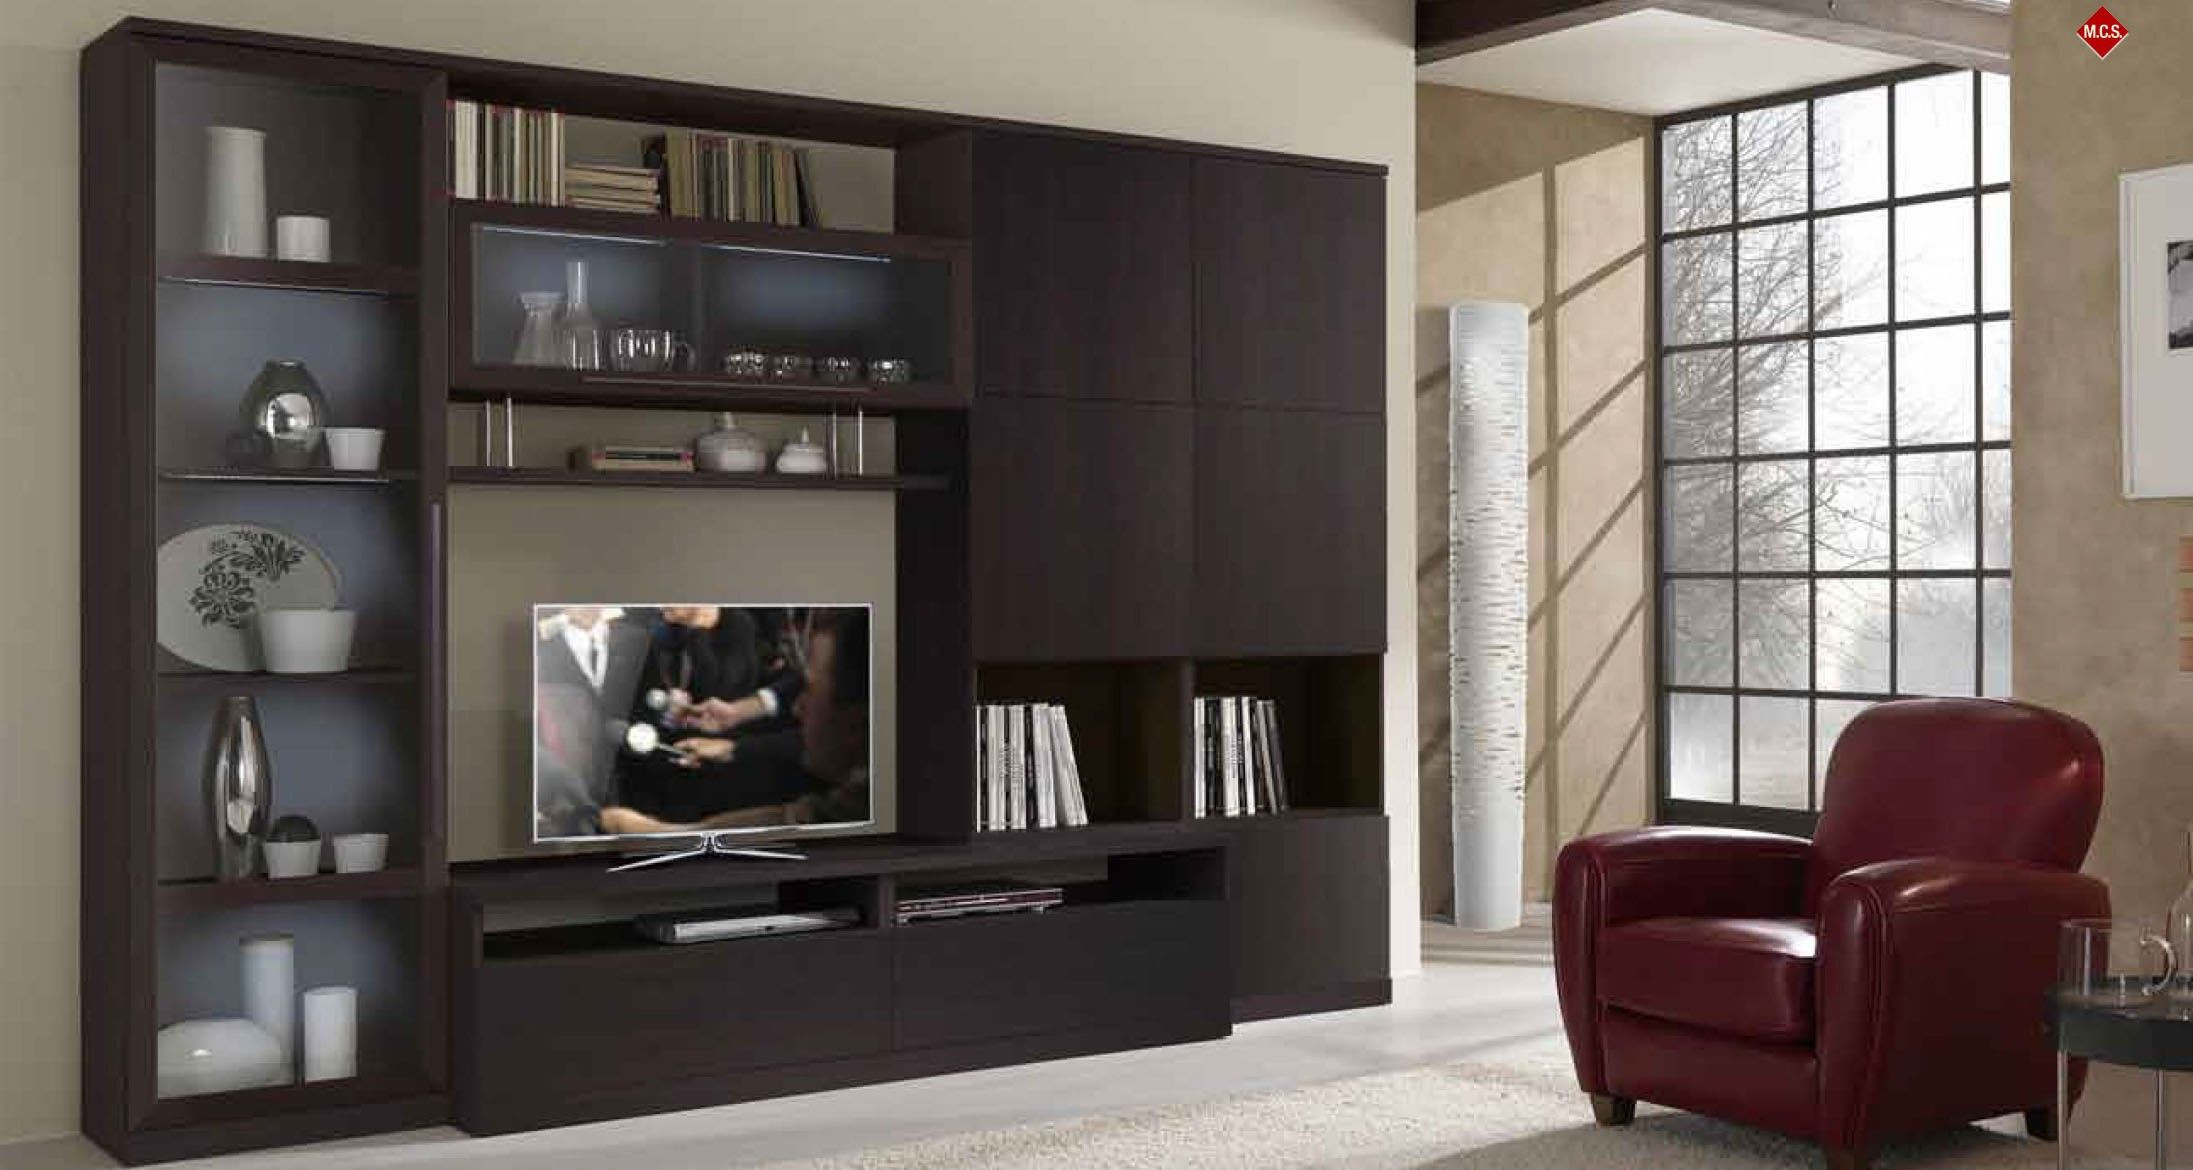 Modern Living Room Cabinets
 Home Built In Bar and wall unit ideas